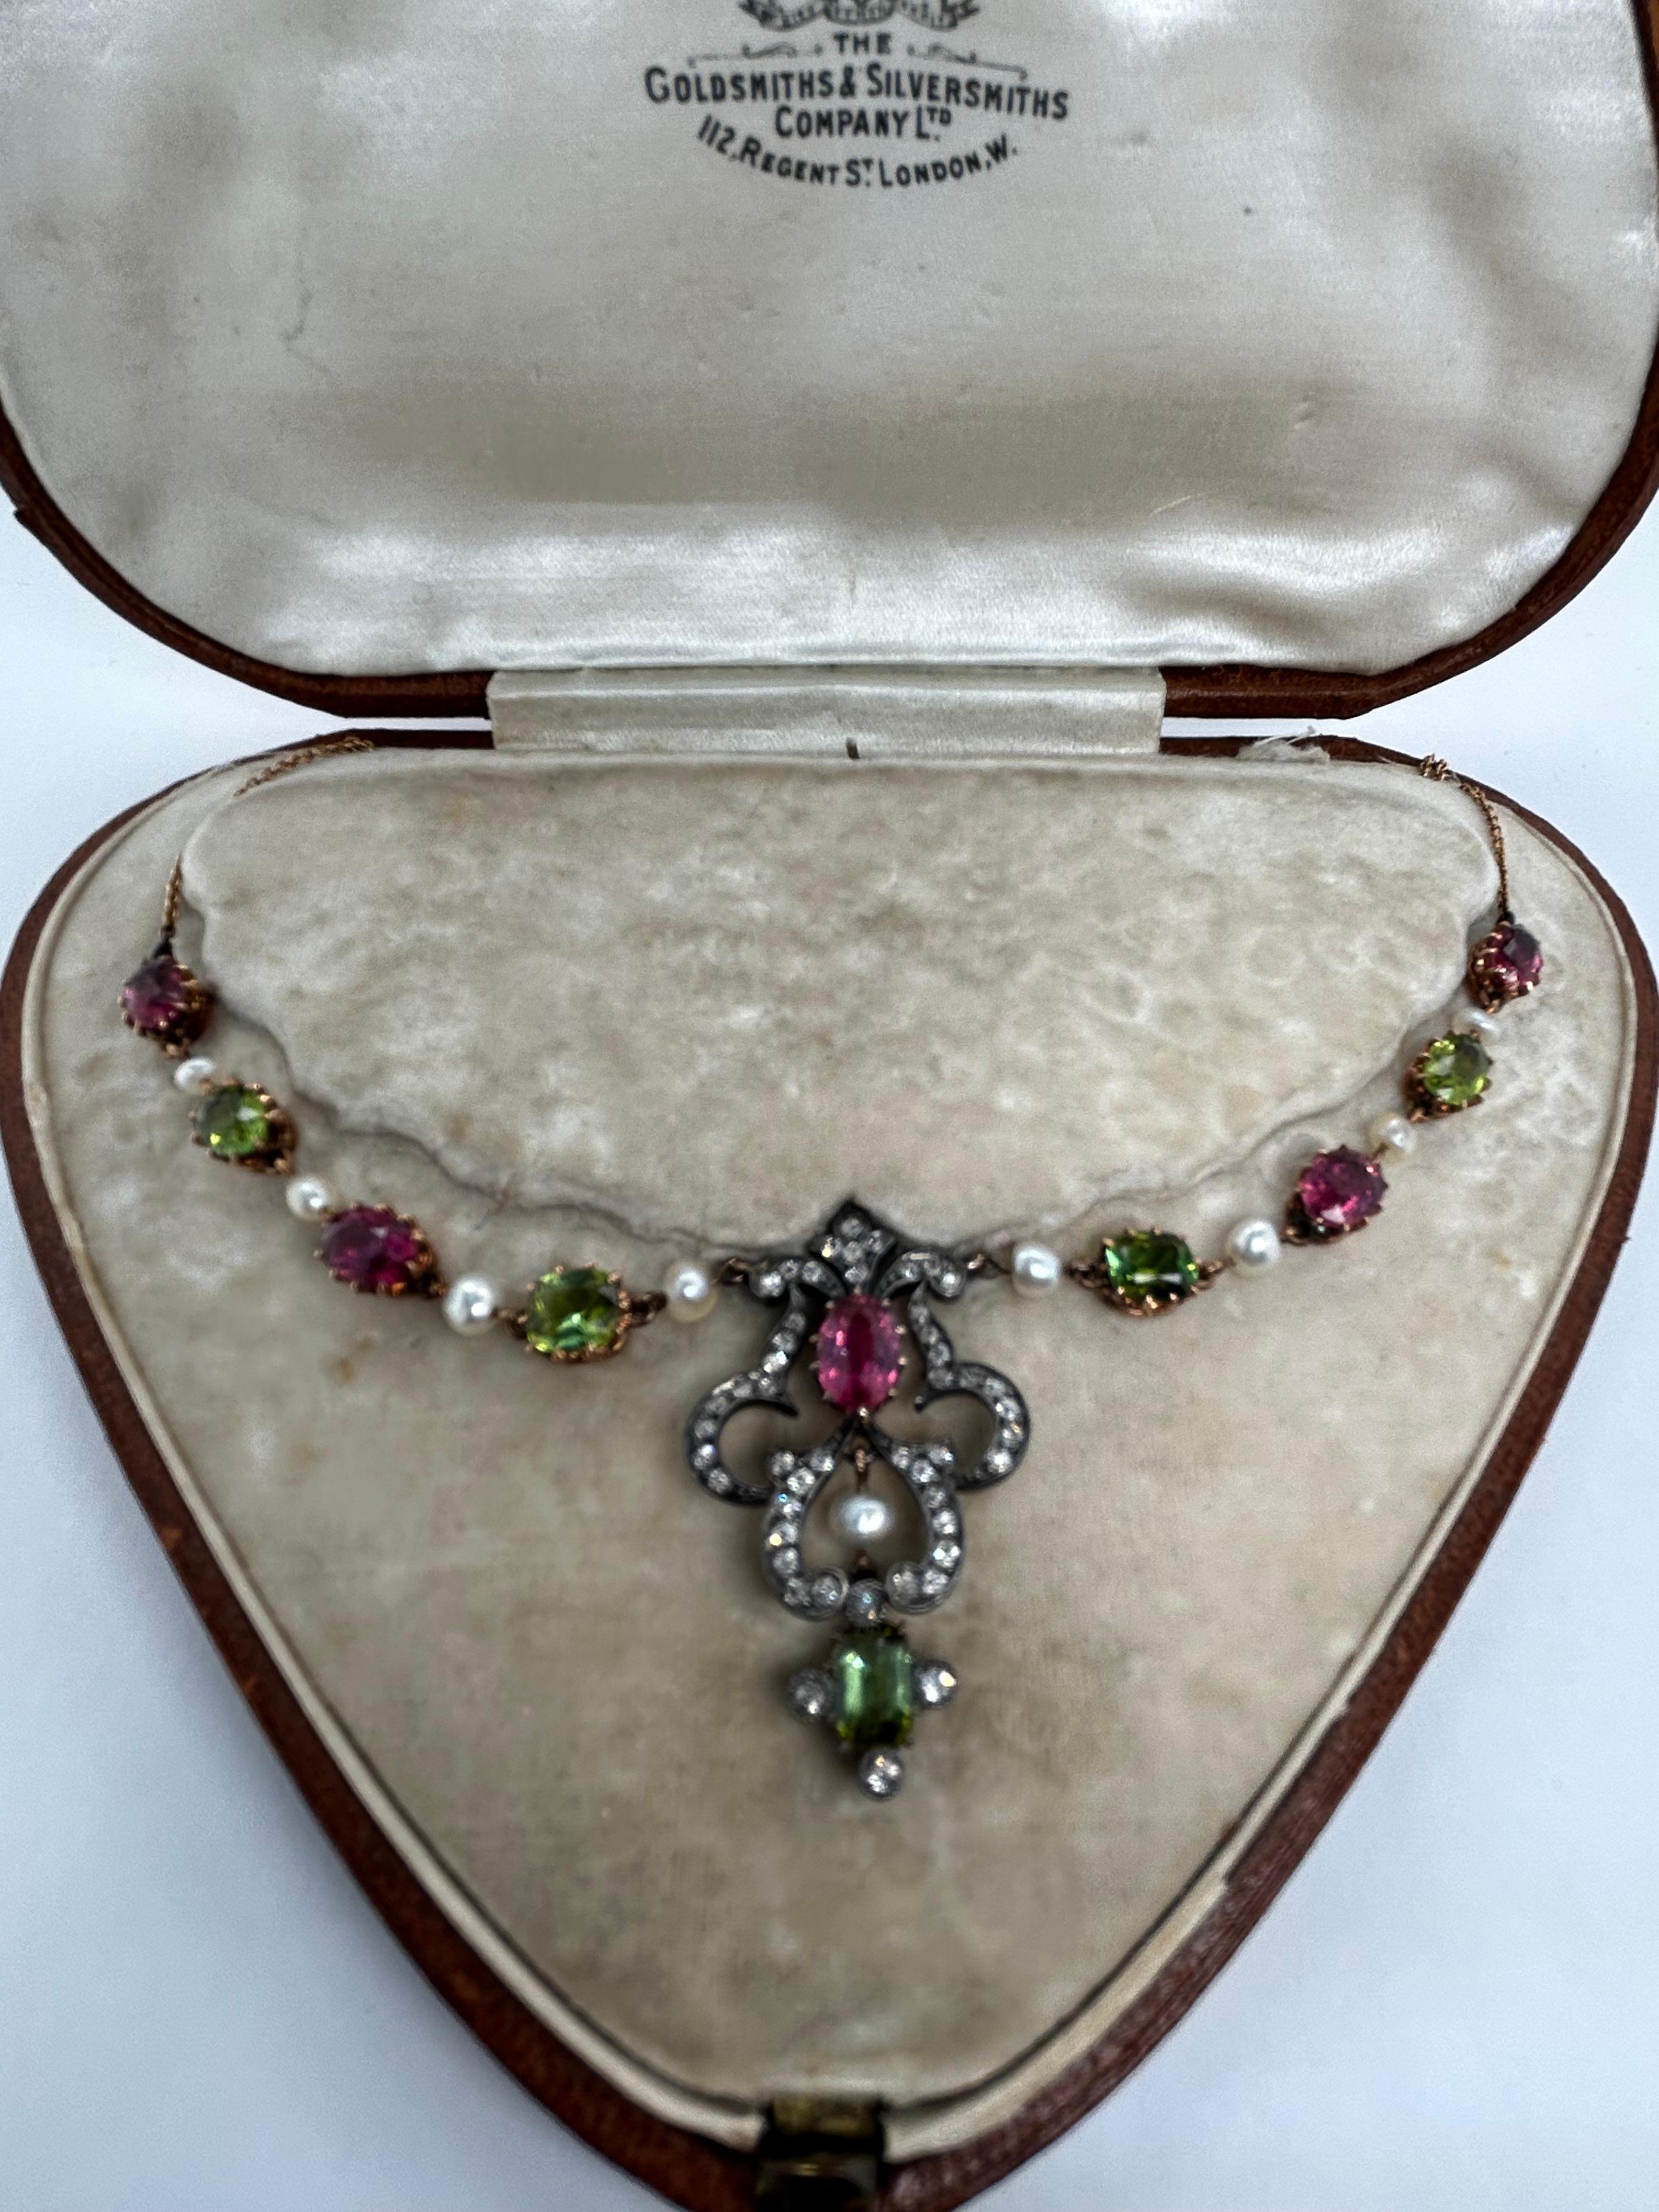 Beautiful Antique 1880s Silver Gold Pink Tourmaline, Peridot Diamond Seed Pearl Necklace with original box, possible English, 10 colored stones, approx 12 carat colored stones, 1/2 carat diamond